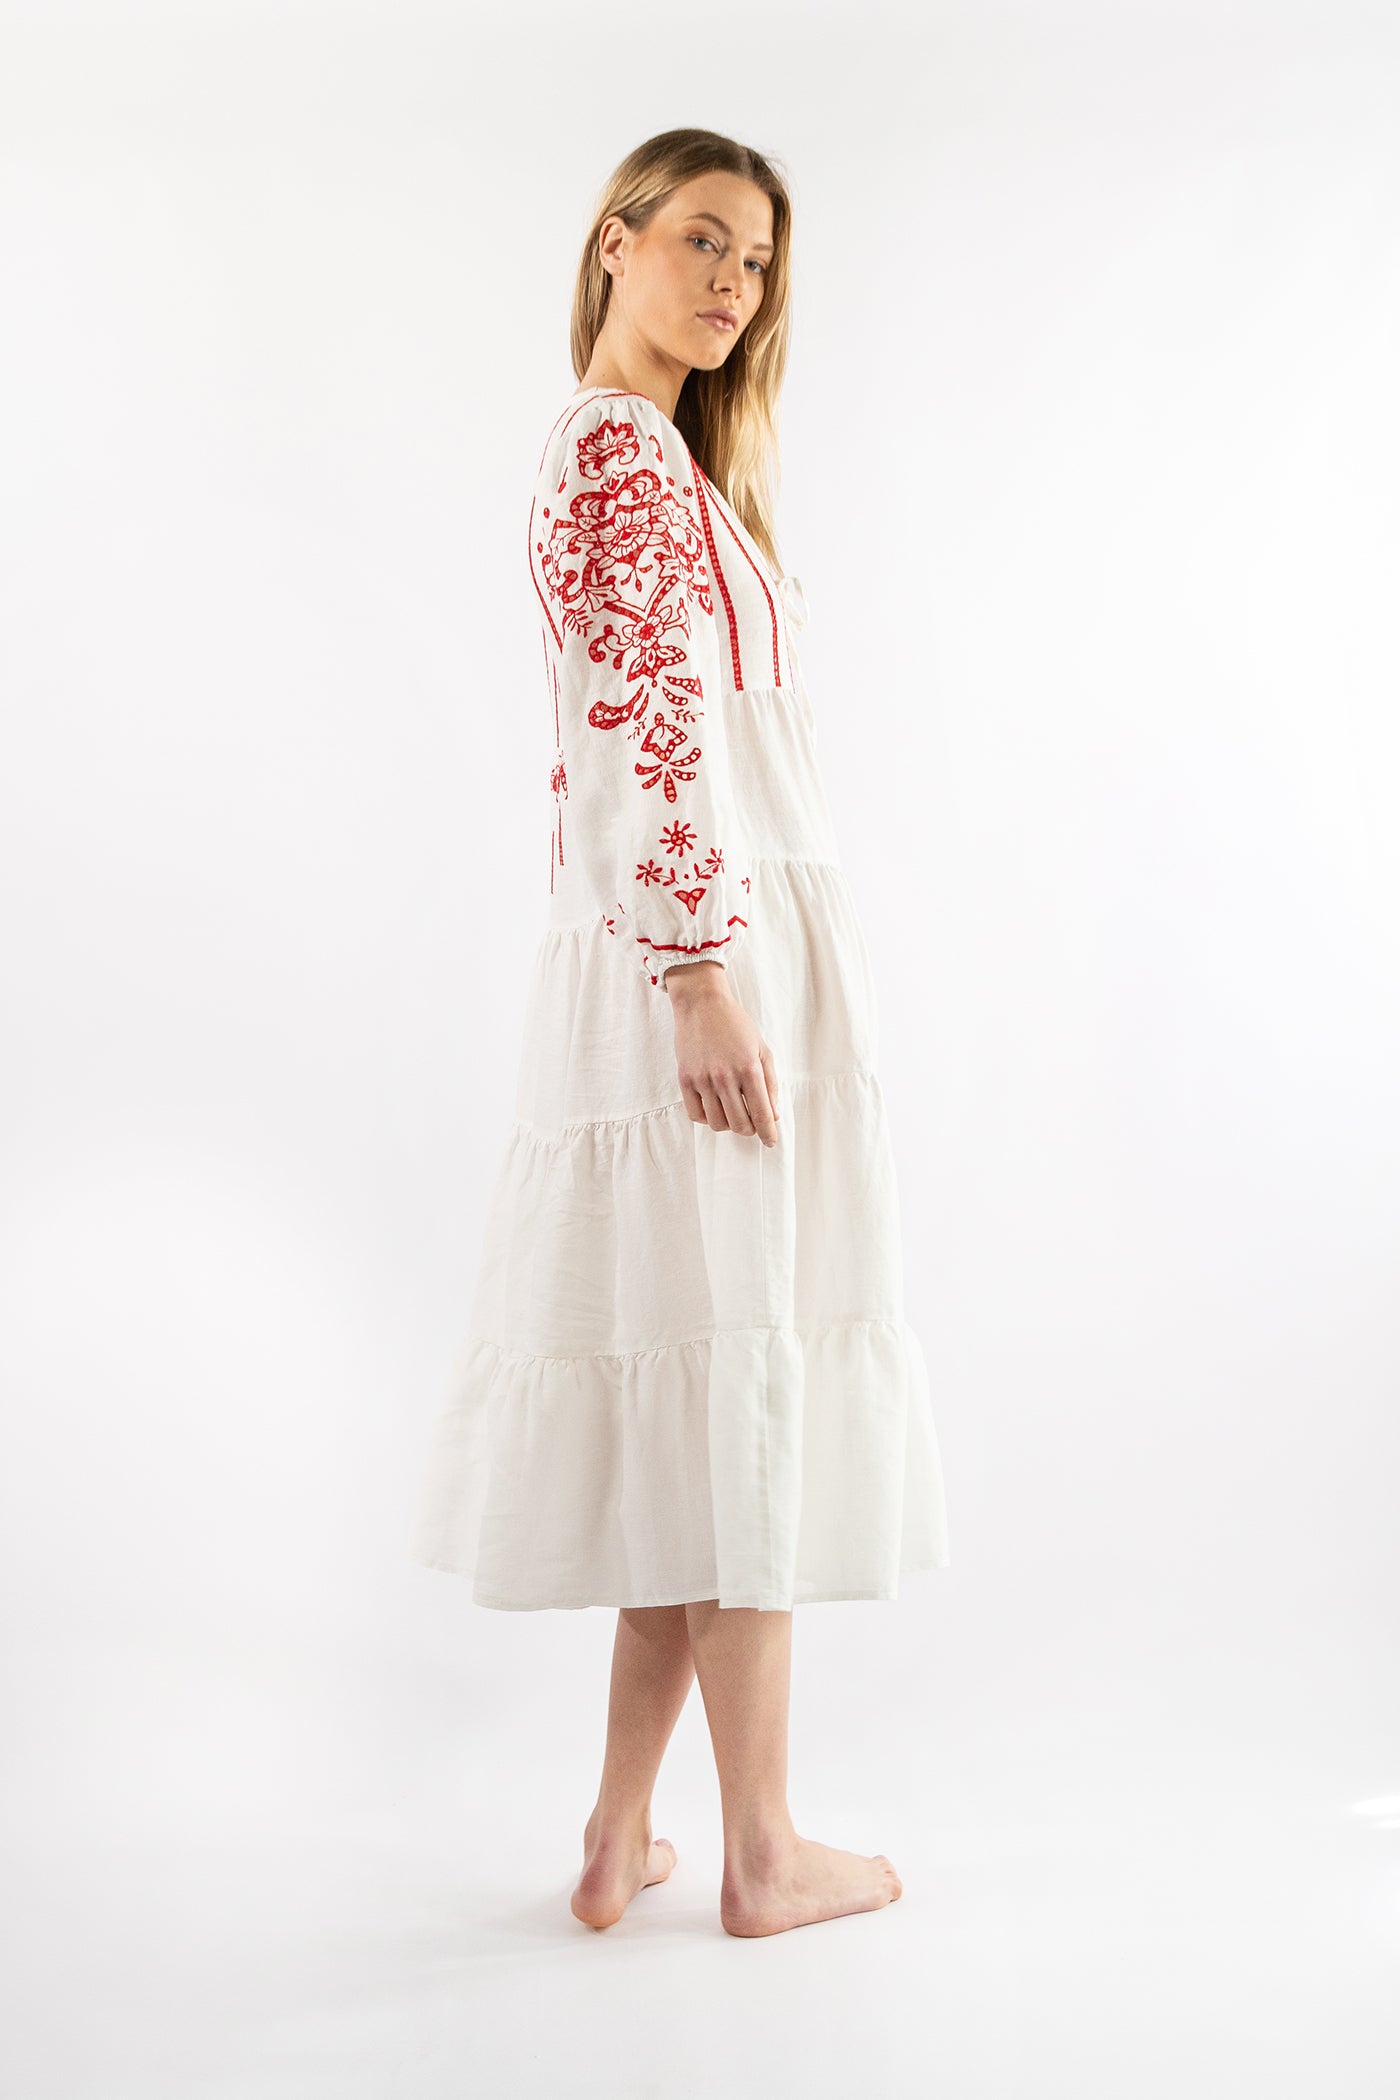 Donia White Red Dress